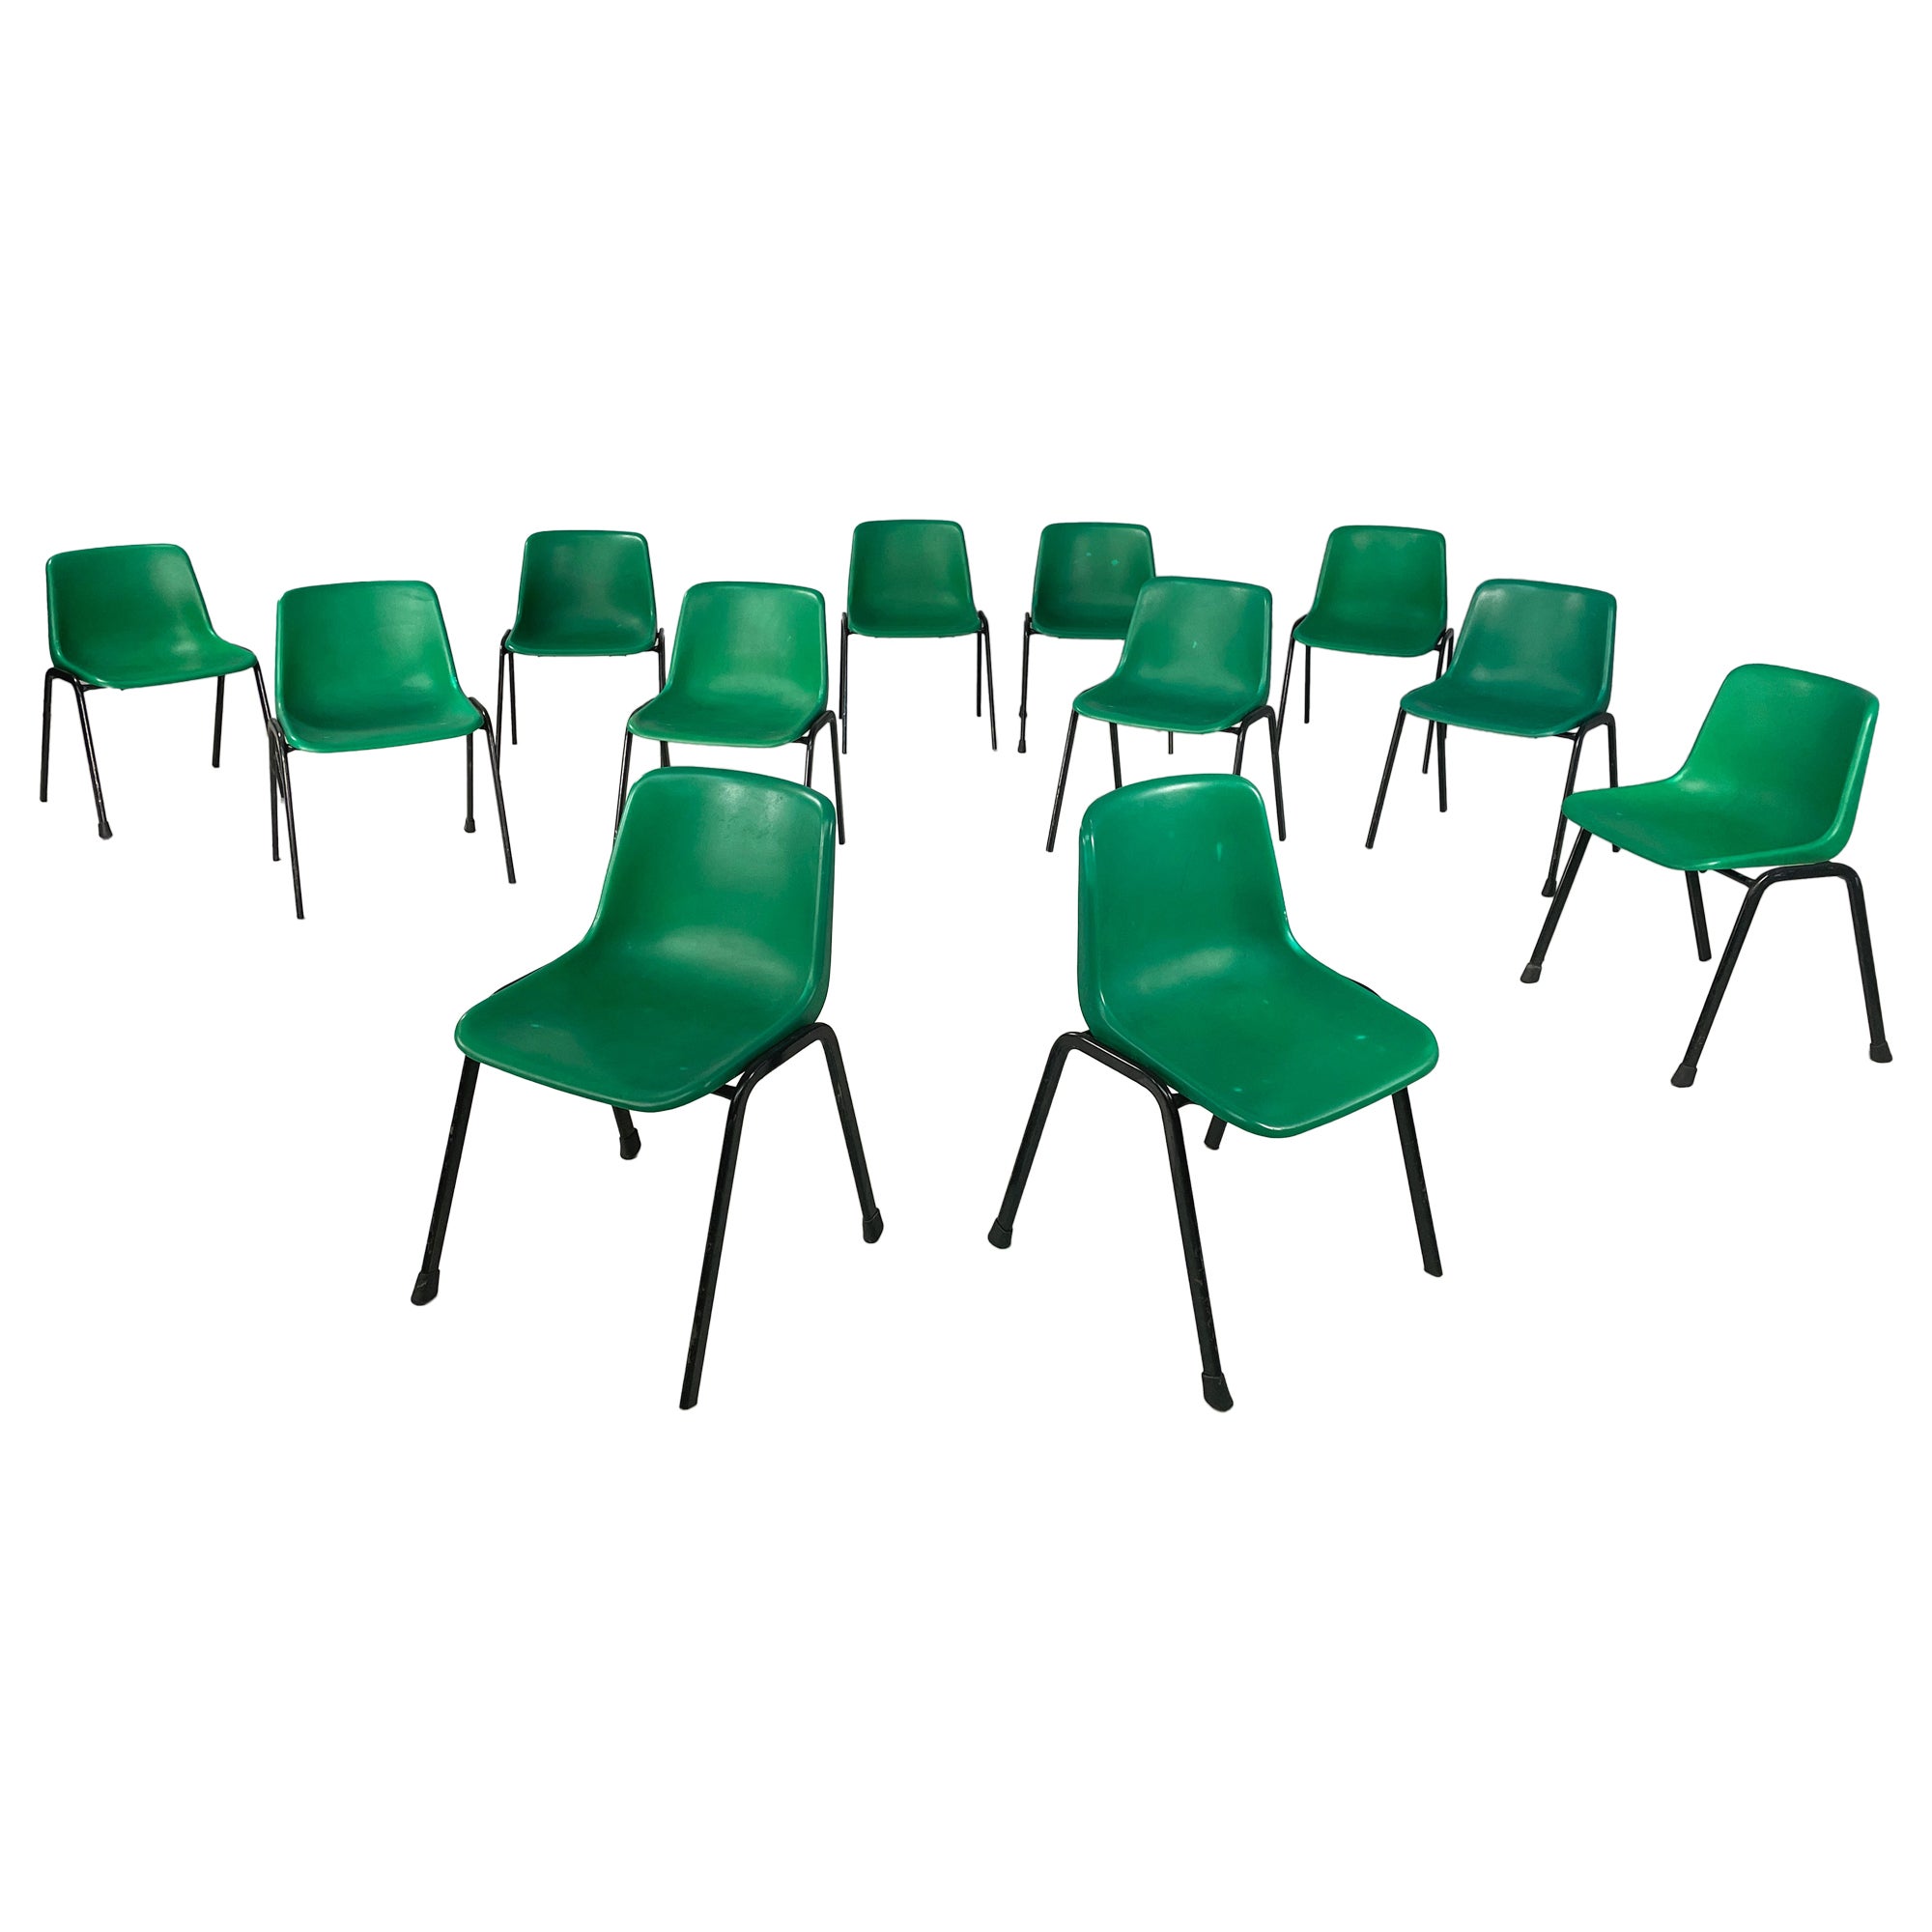 Italian modern Stackable chairs in green plastic and black metal, 2000s For Sale